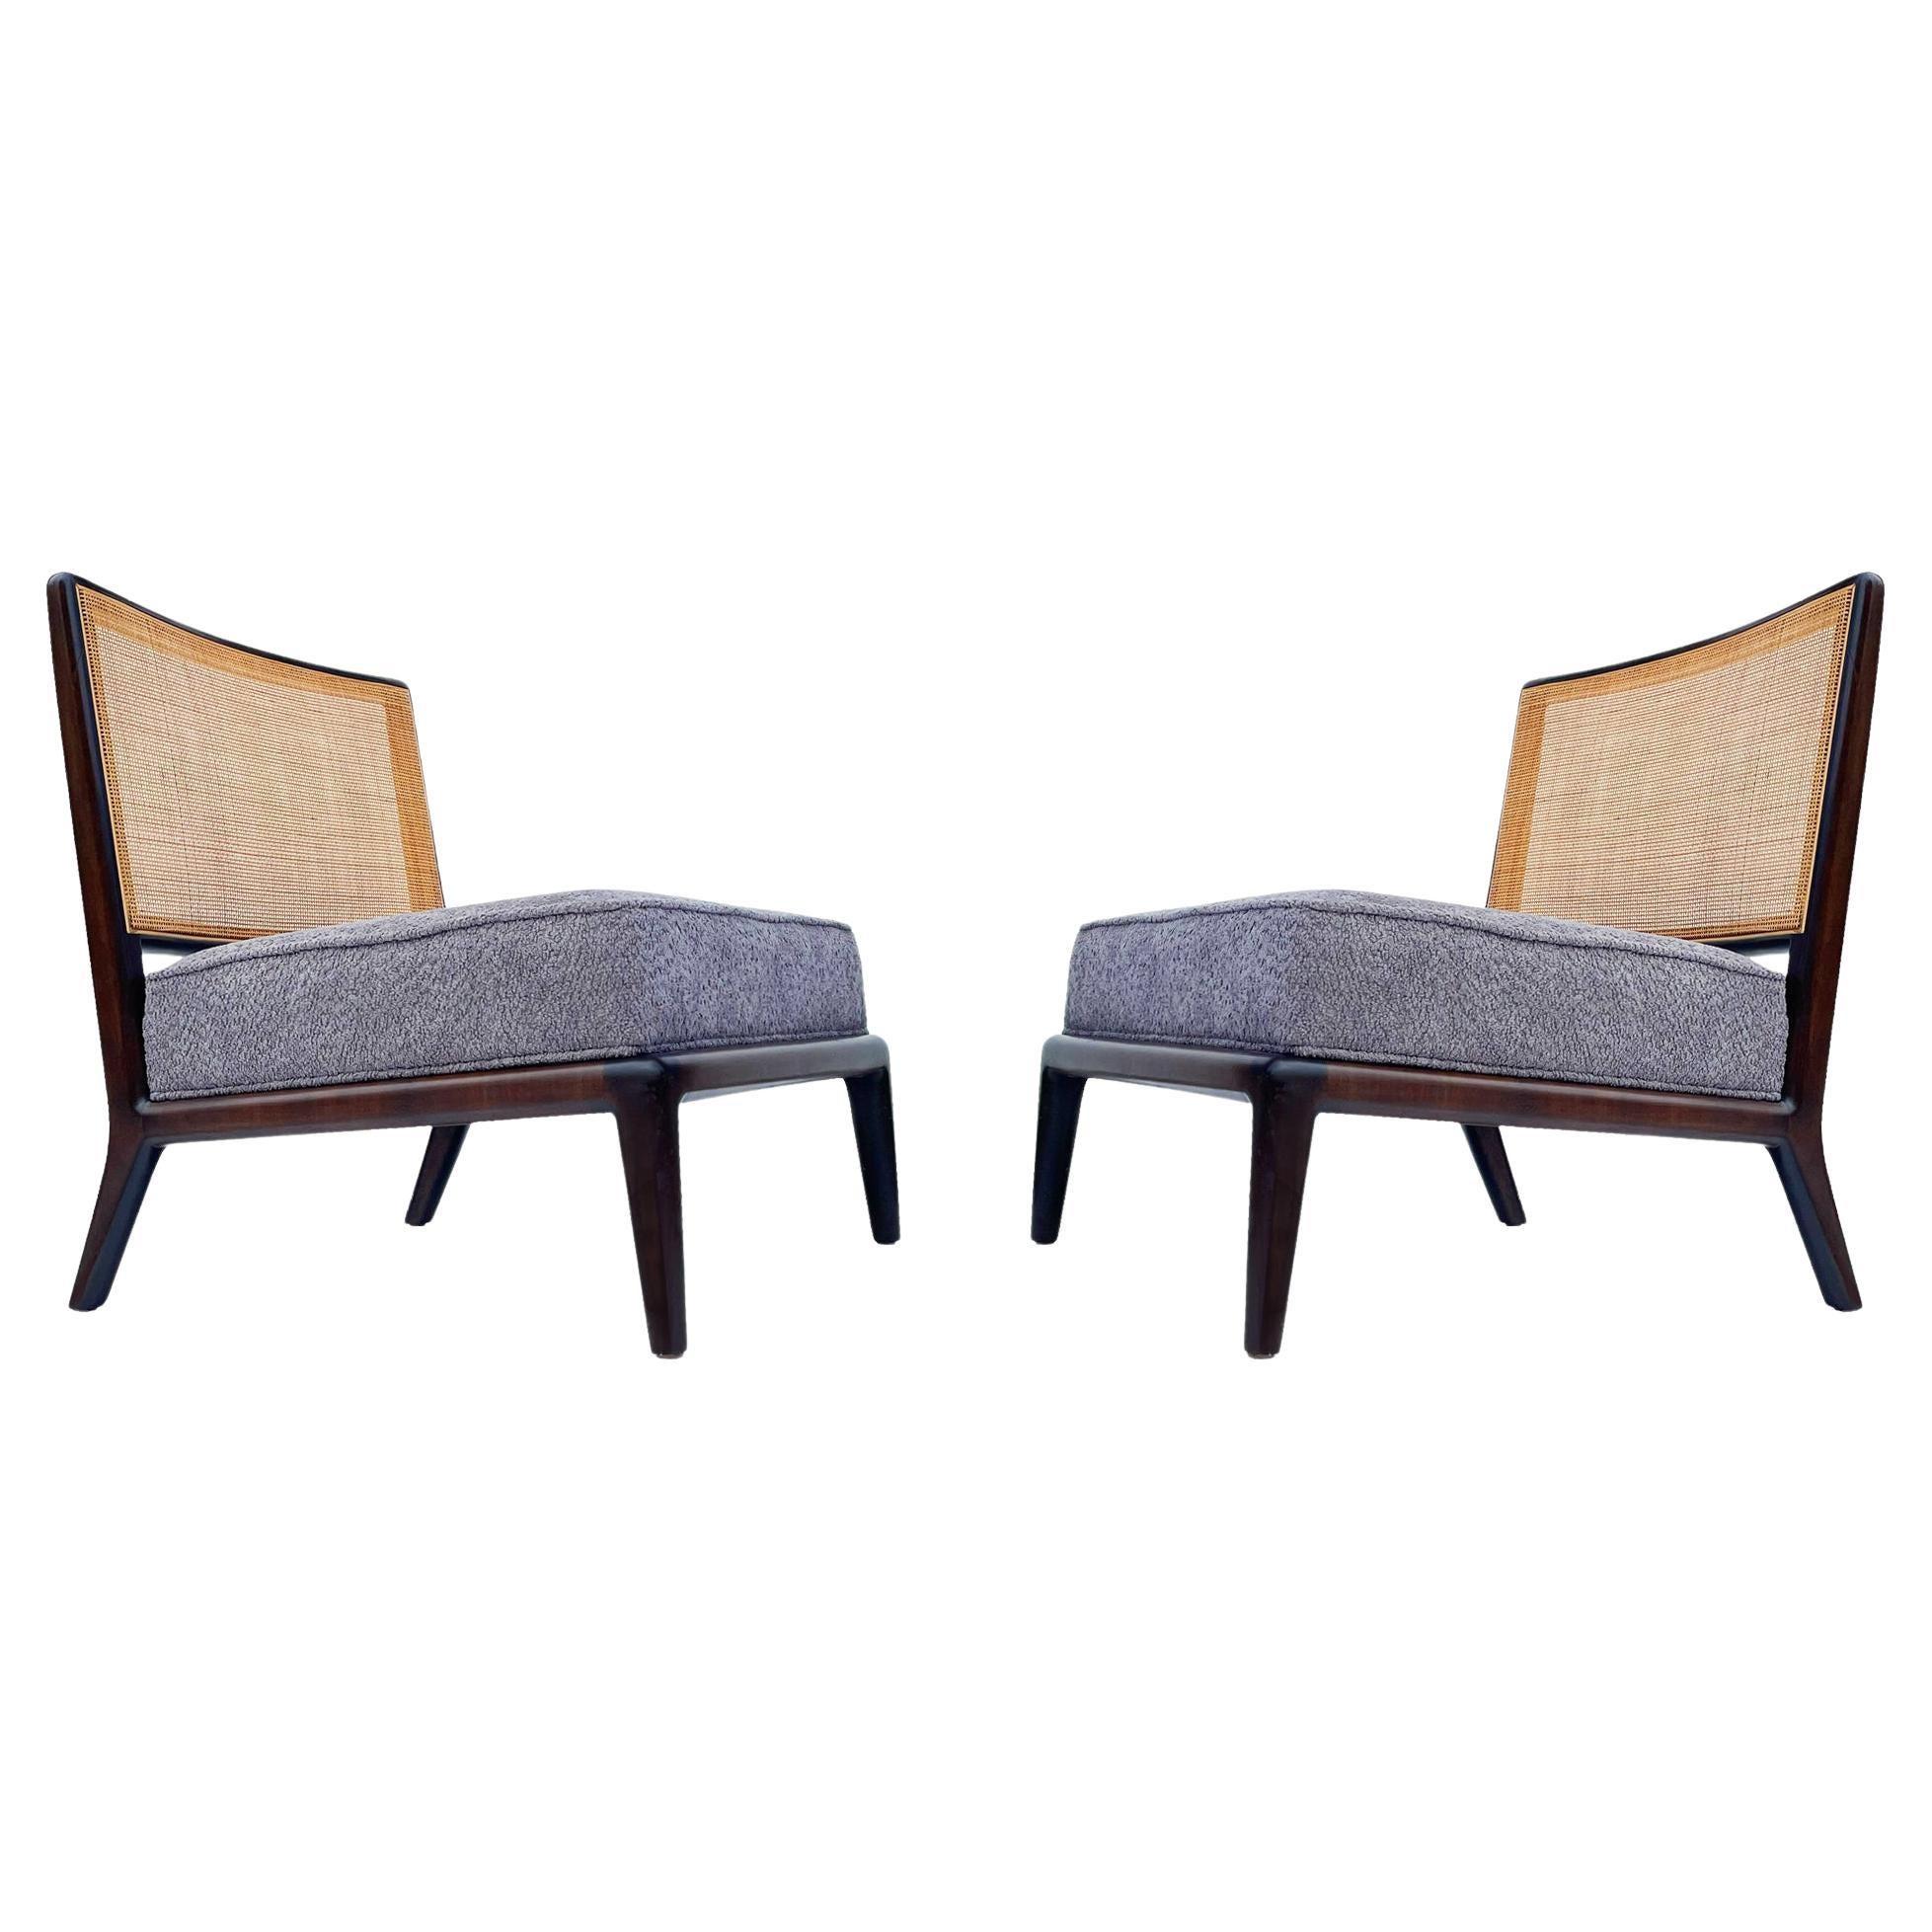 A sleek modern pair of slipper chairs attributed to Robsjohn Gibbings. These feature dark stained solid wood frames. The caning and grey boucle upholstery were recently done. Clean ready to use chairs. 